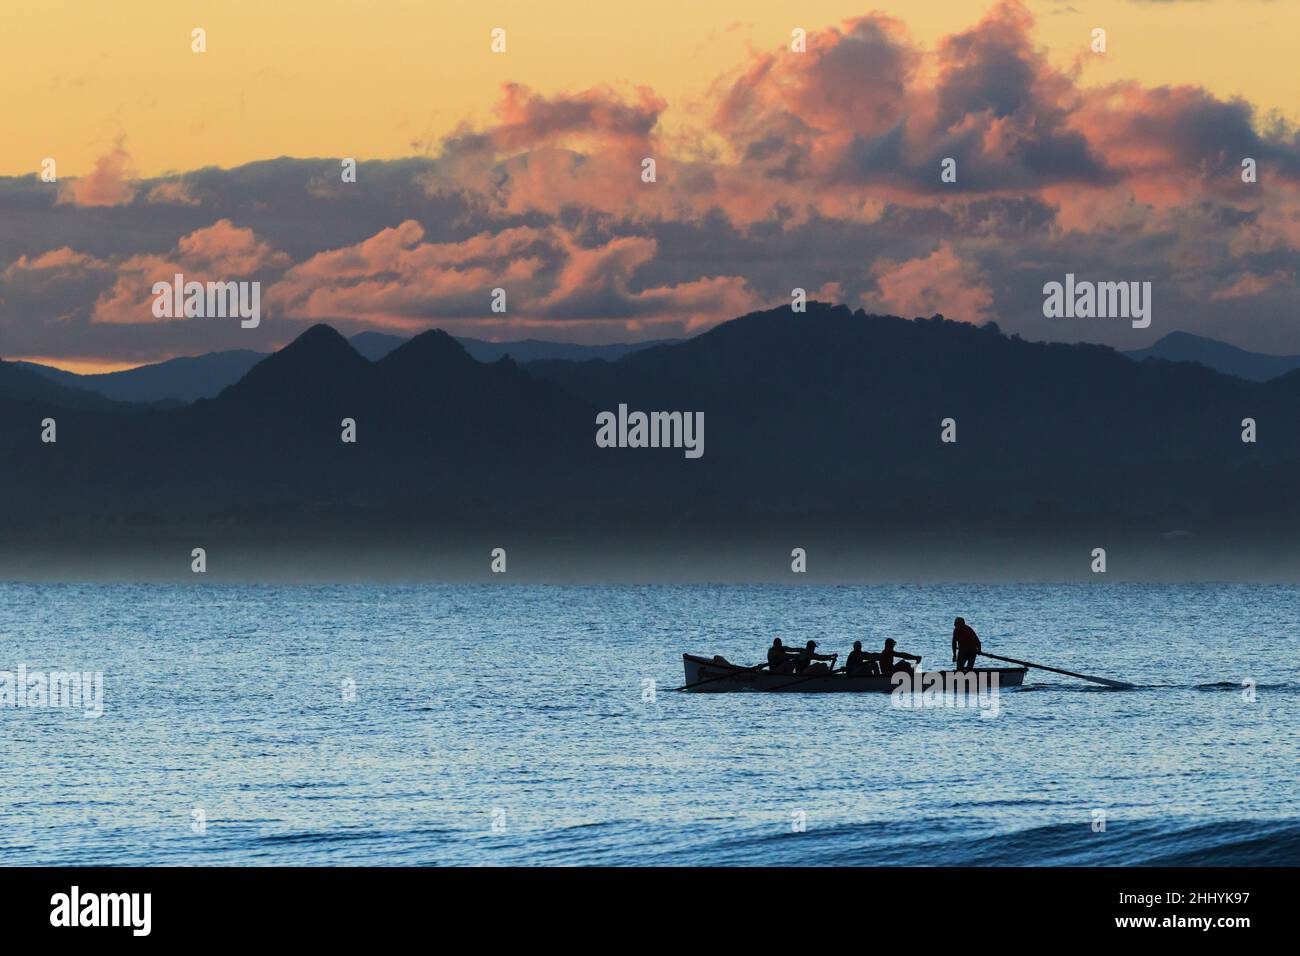 Traditional life saving boat on the ocean ocean. Byron Bay, New South Wales, Australia Stock Photo